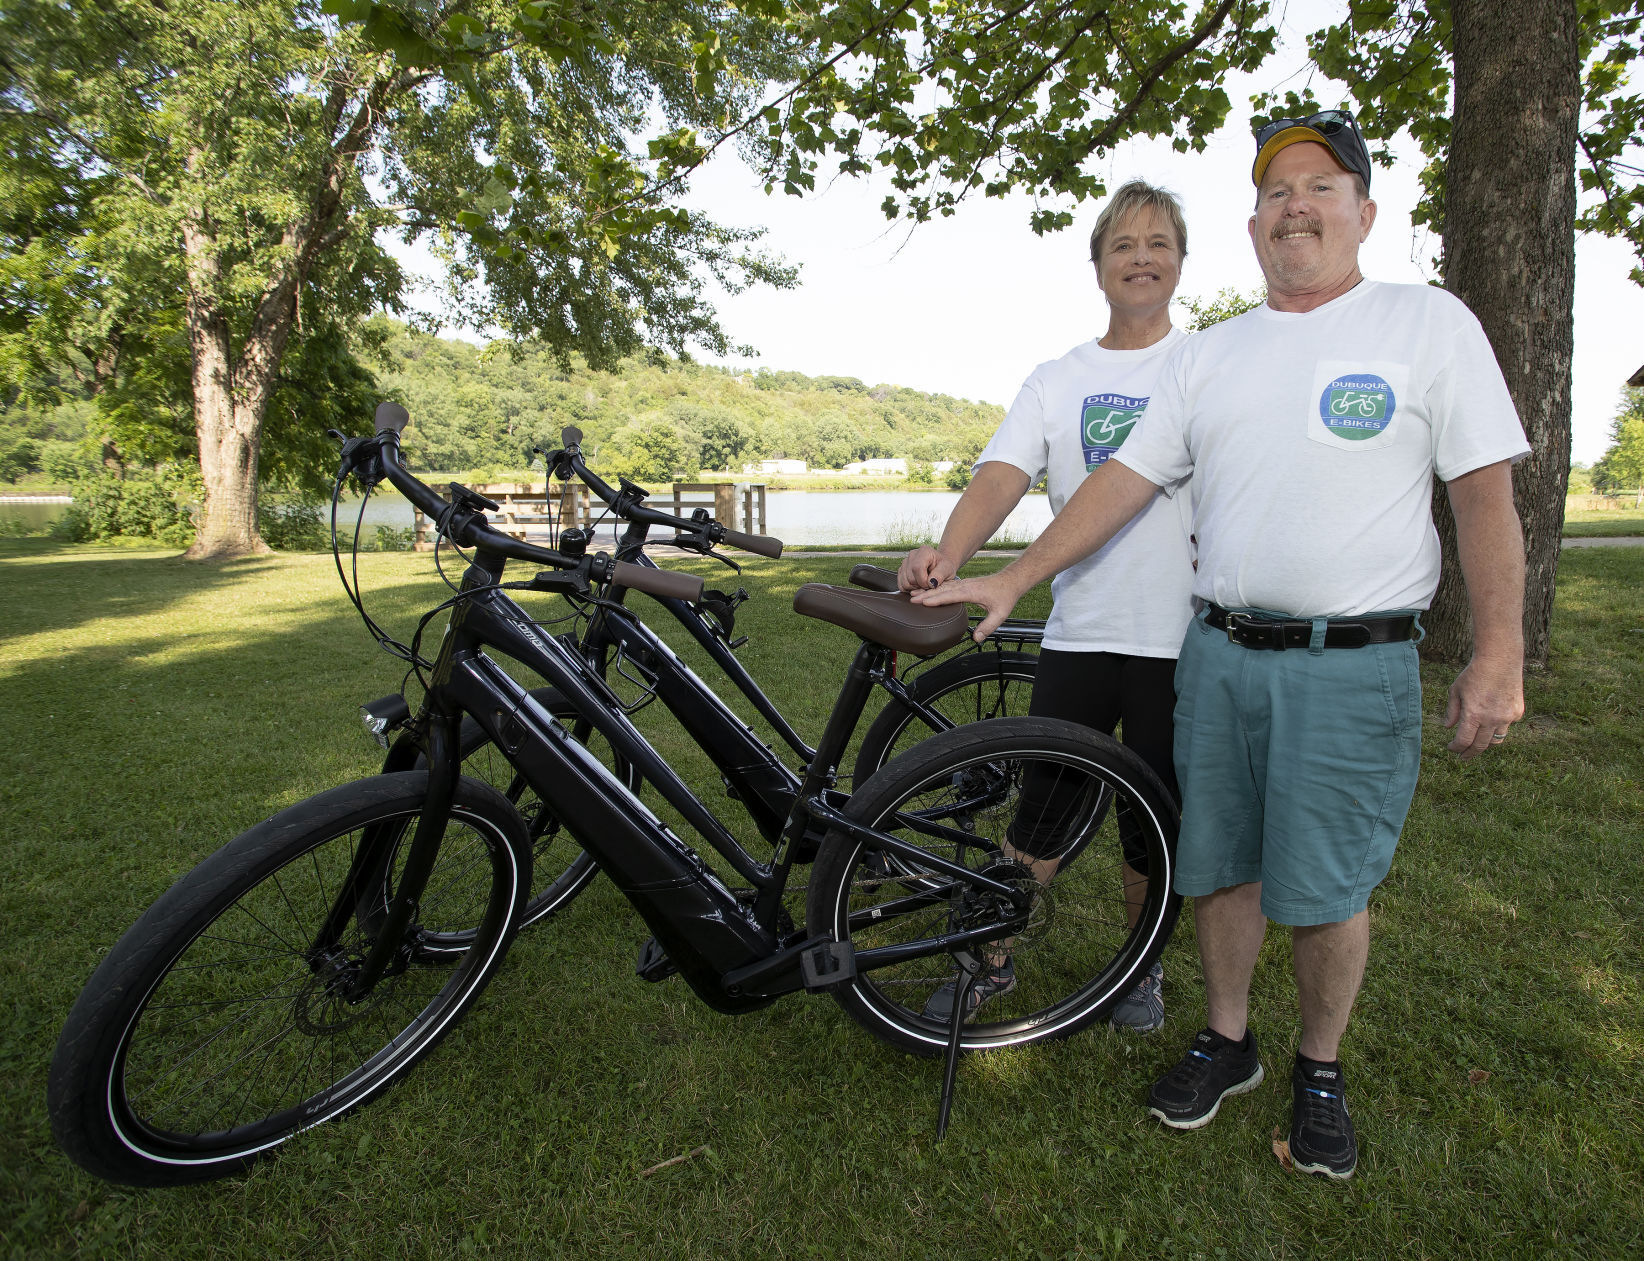 Sherri and John Driscoll display two of their pedal-assist electric bikes on Friday at Heritage Trail. The bikes are available for rent from their company, Dubuque E-Bikes.    PHOTO CREDIT: Stephen Gassman